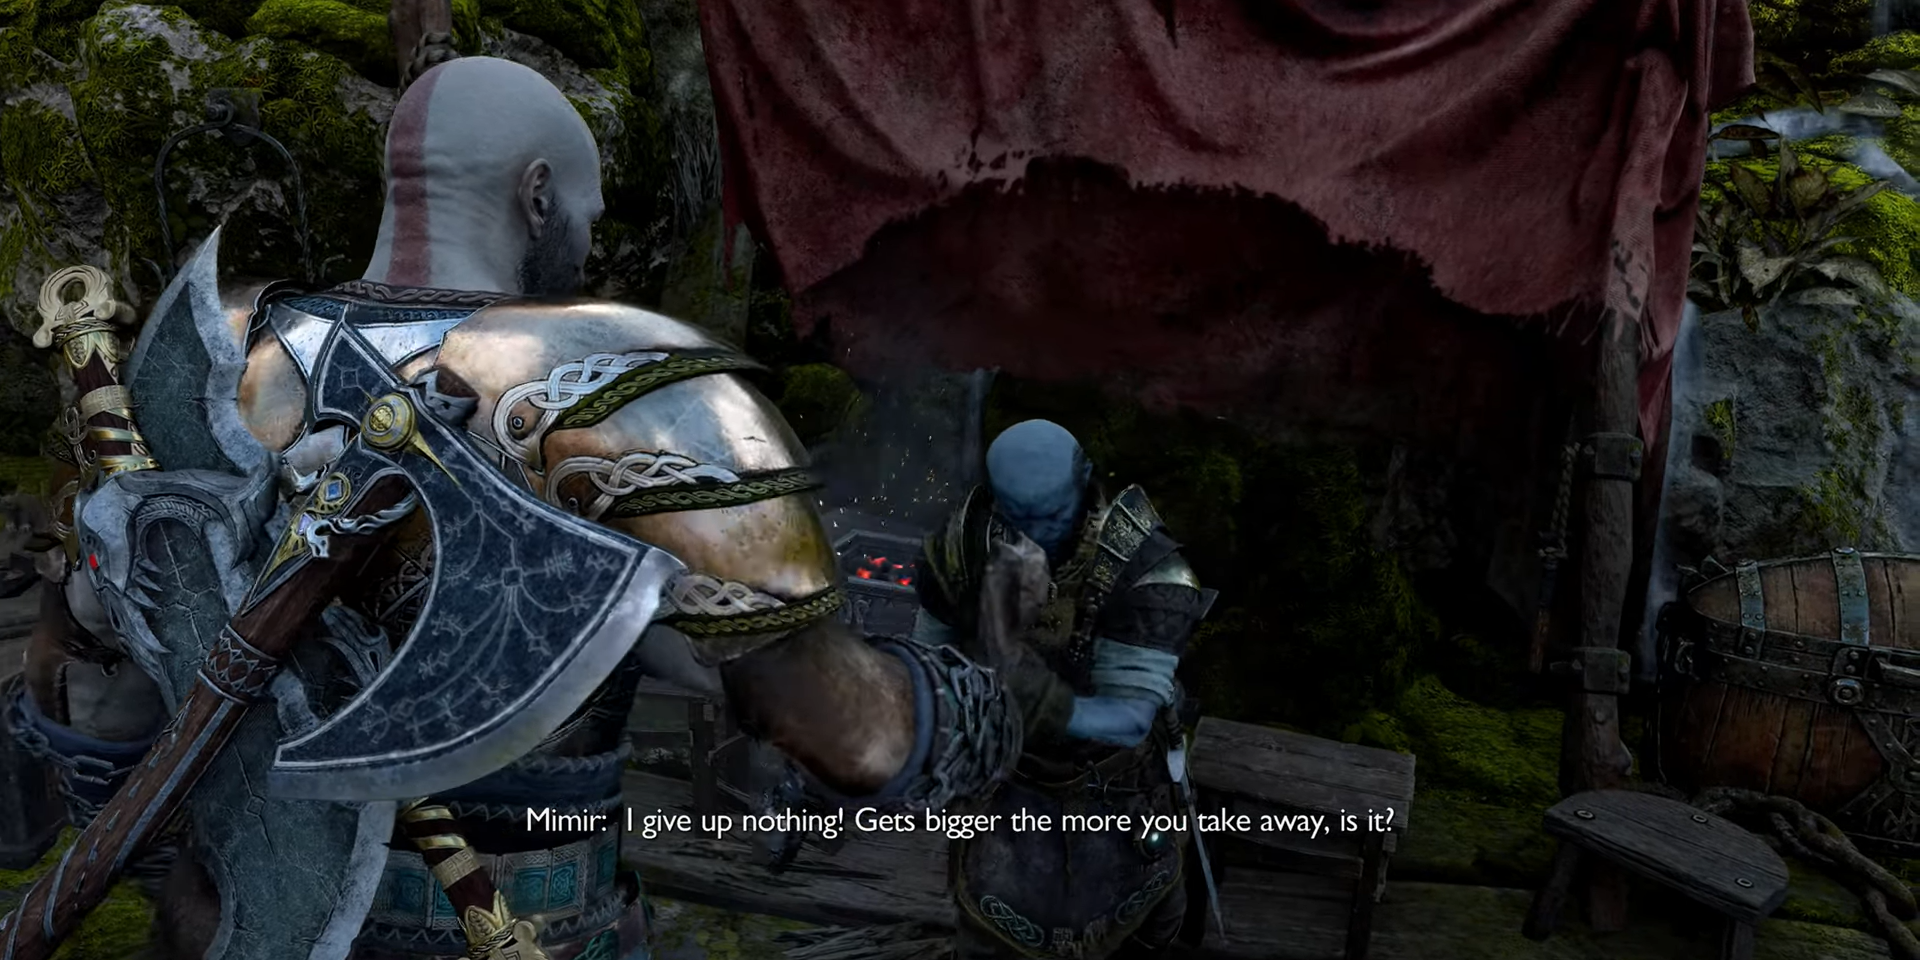 Screenshot. Mimir bows his head to Kratos, saying "I give up nothing! Gets bigger the more you take away, is it?"